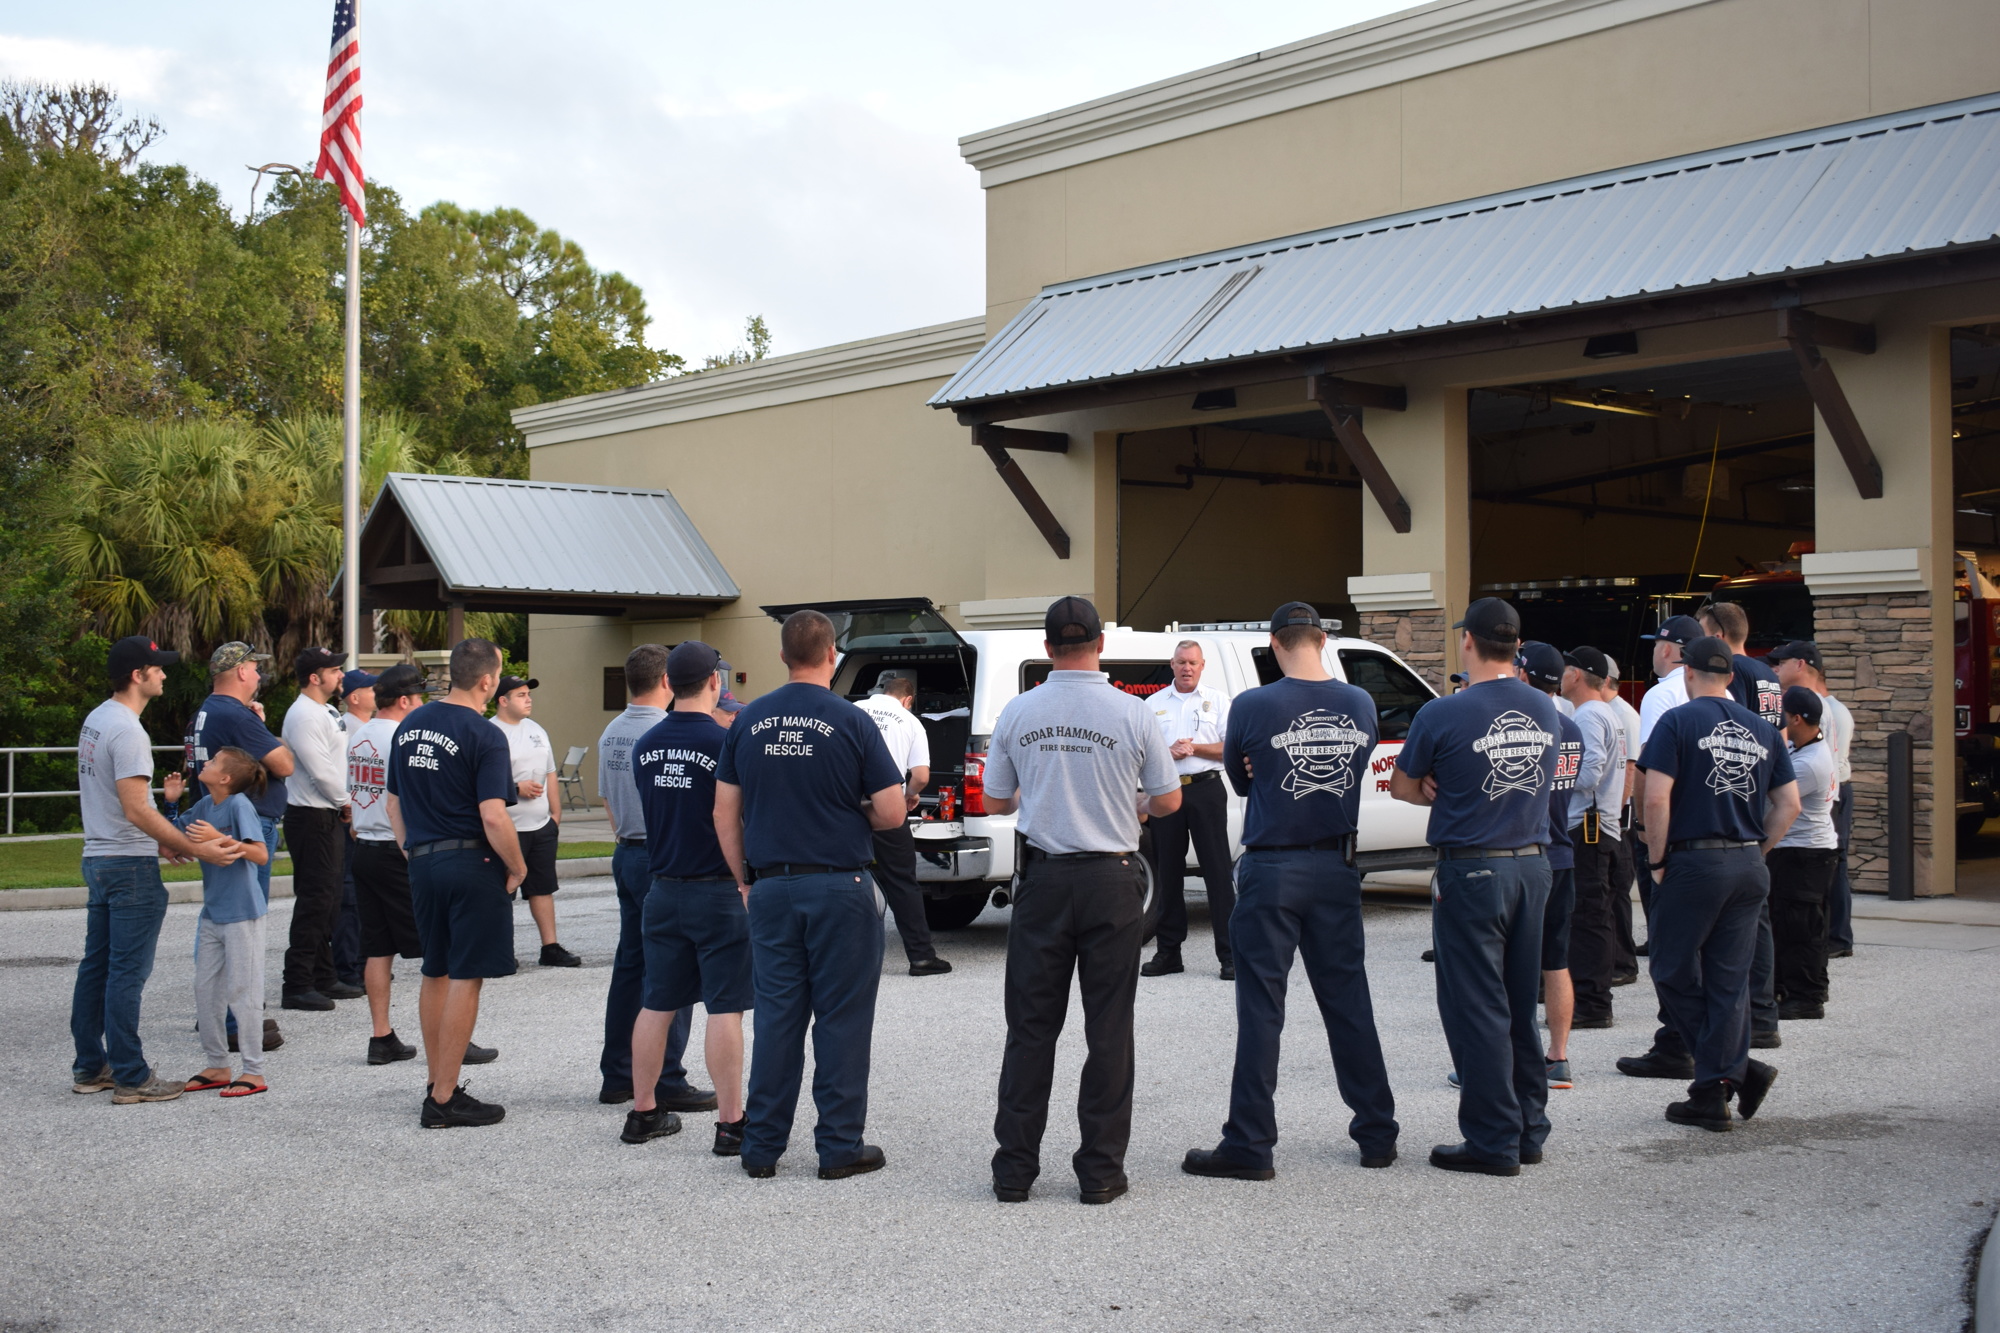 Firefighters gather for instructions before heading to Orlando.